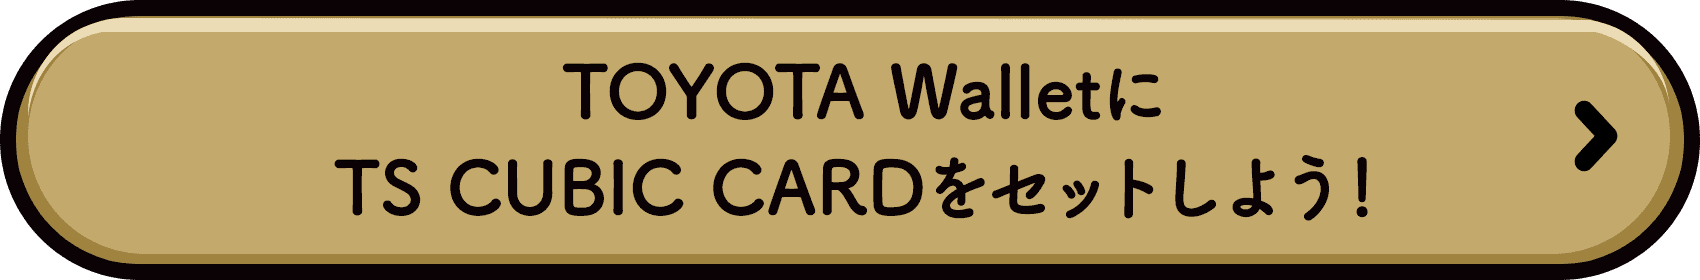 TOYOTA WalletにTS CUBIC CARDをセットしよう！